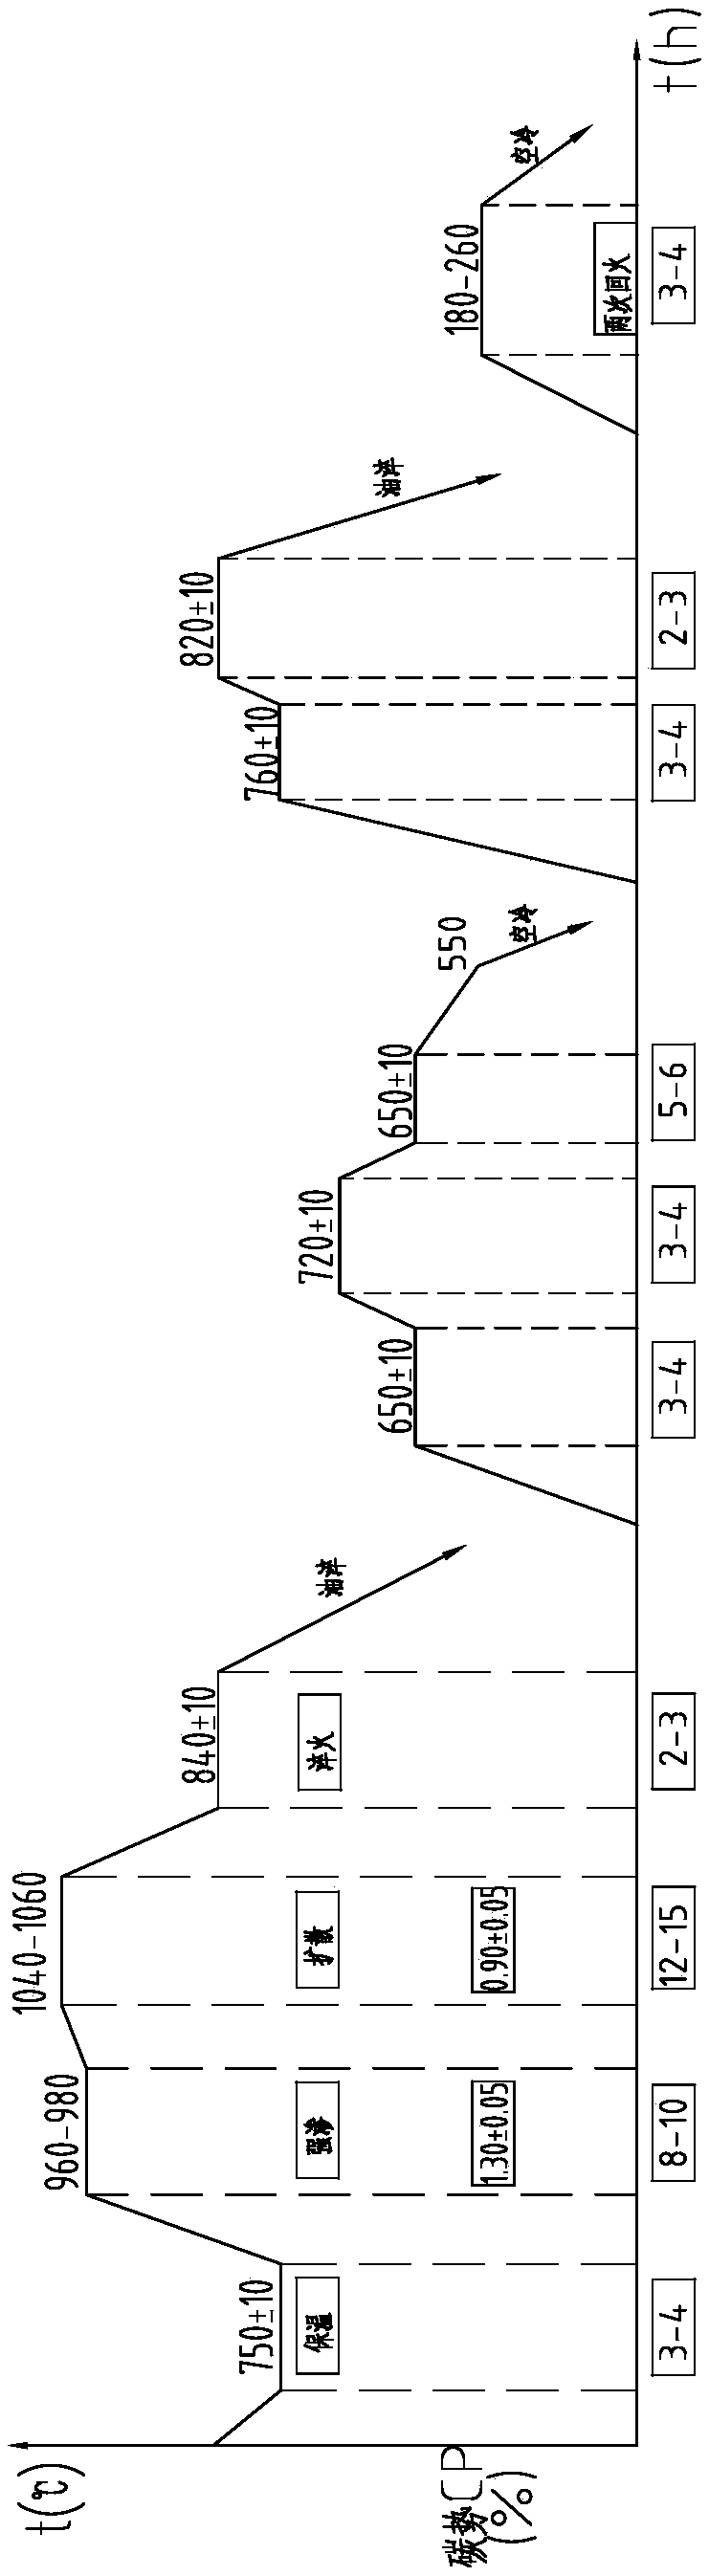 Carburizing and Quenching Method for Large Excavator Gears